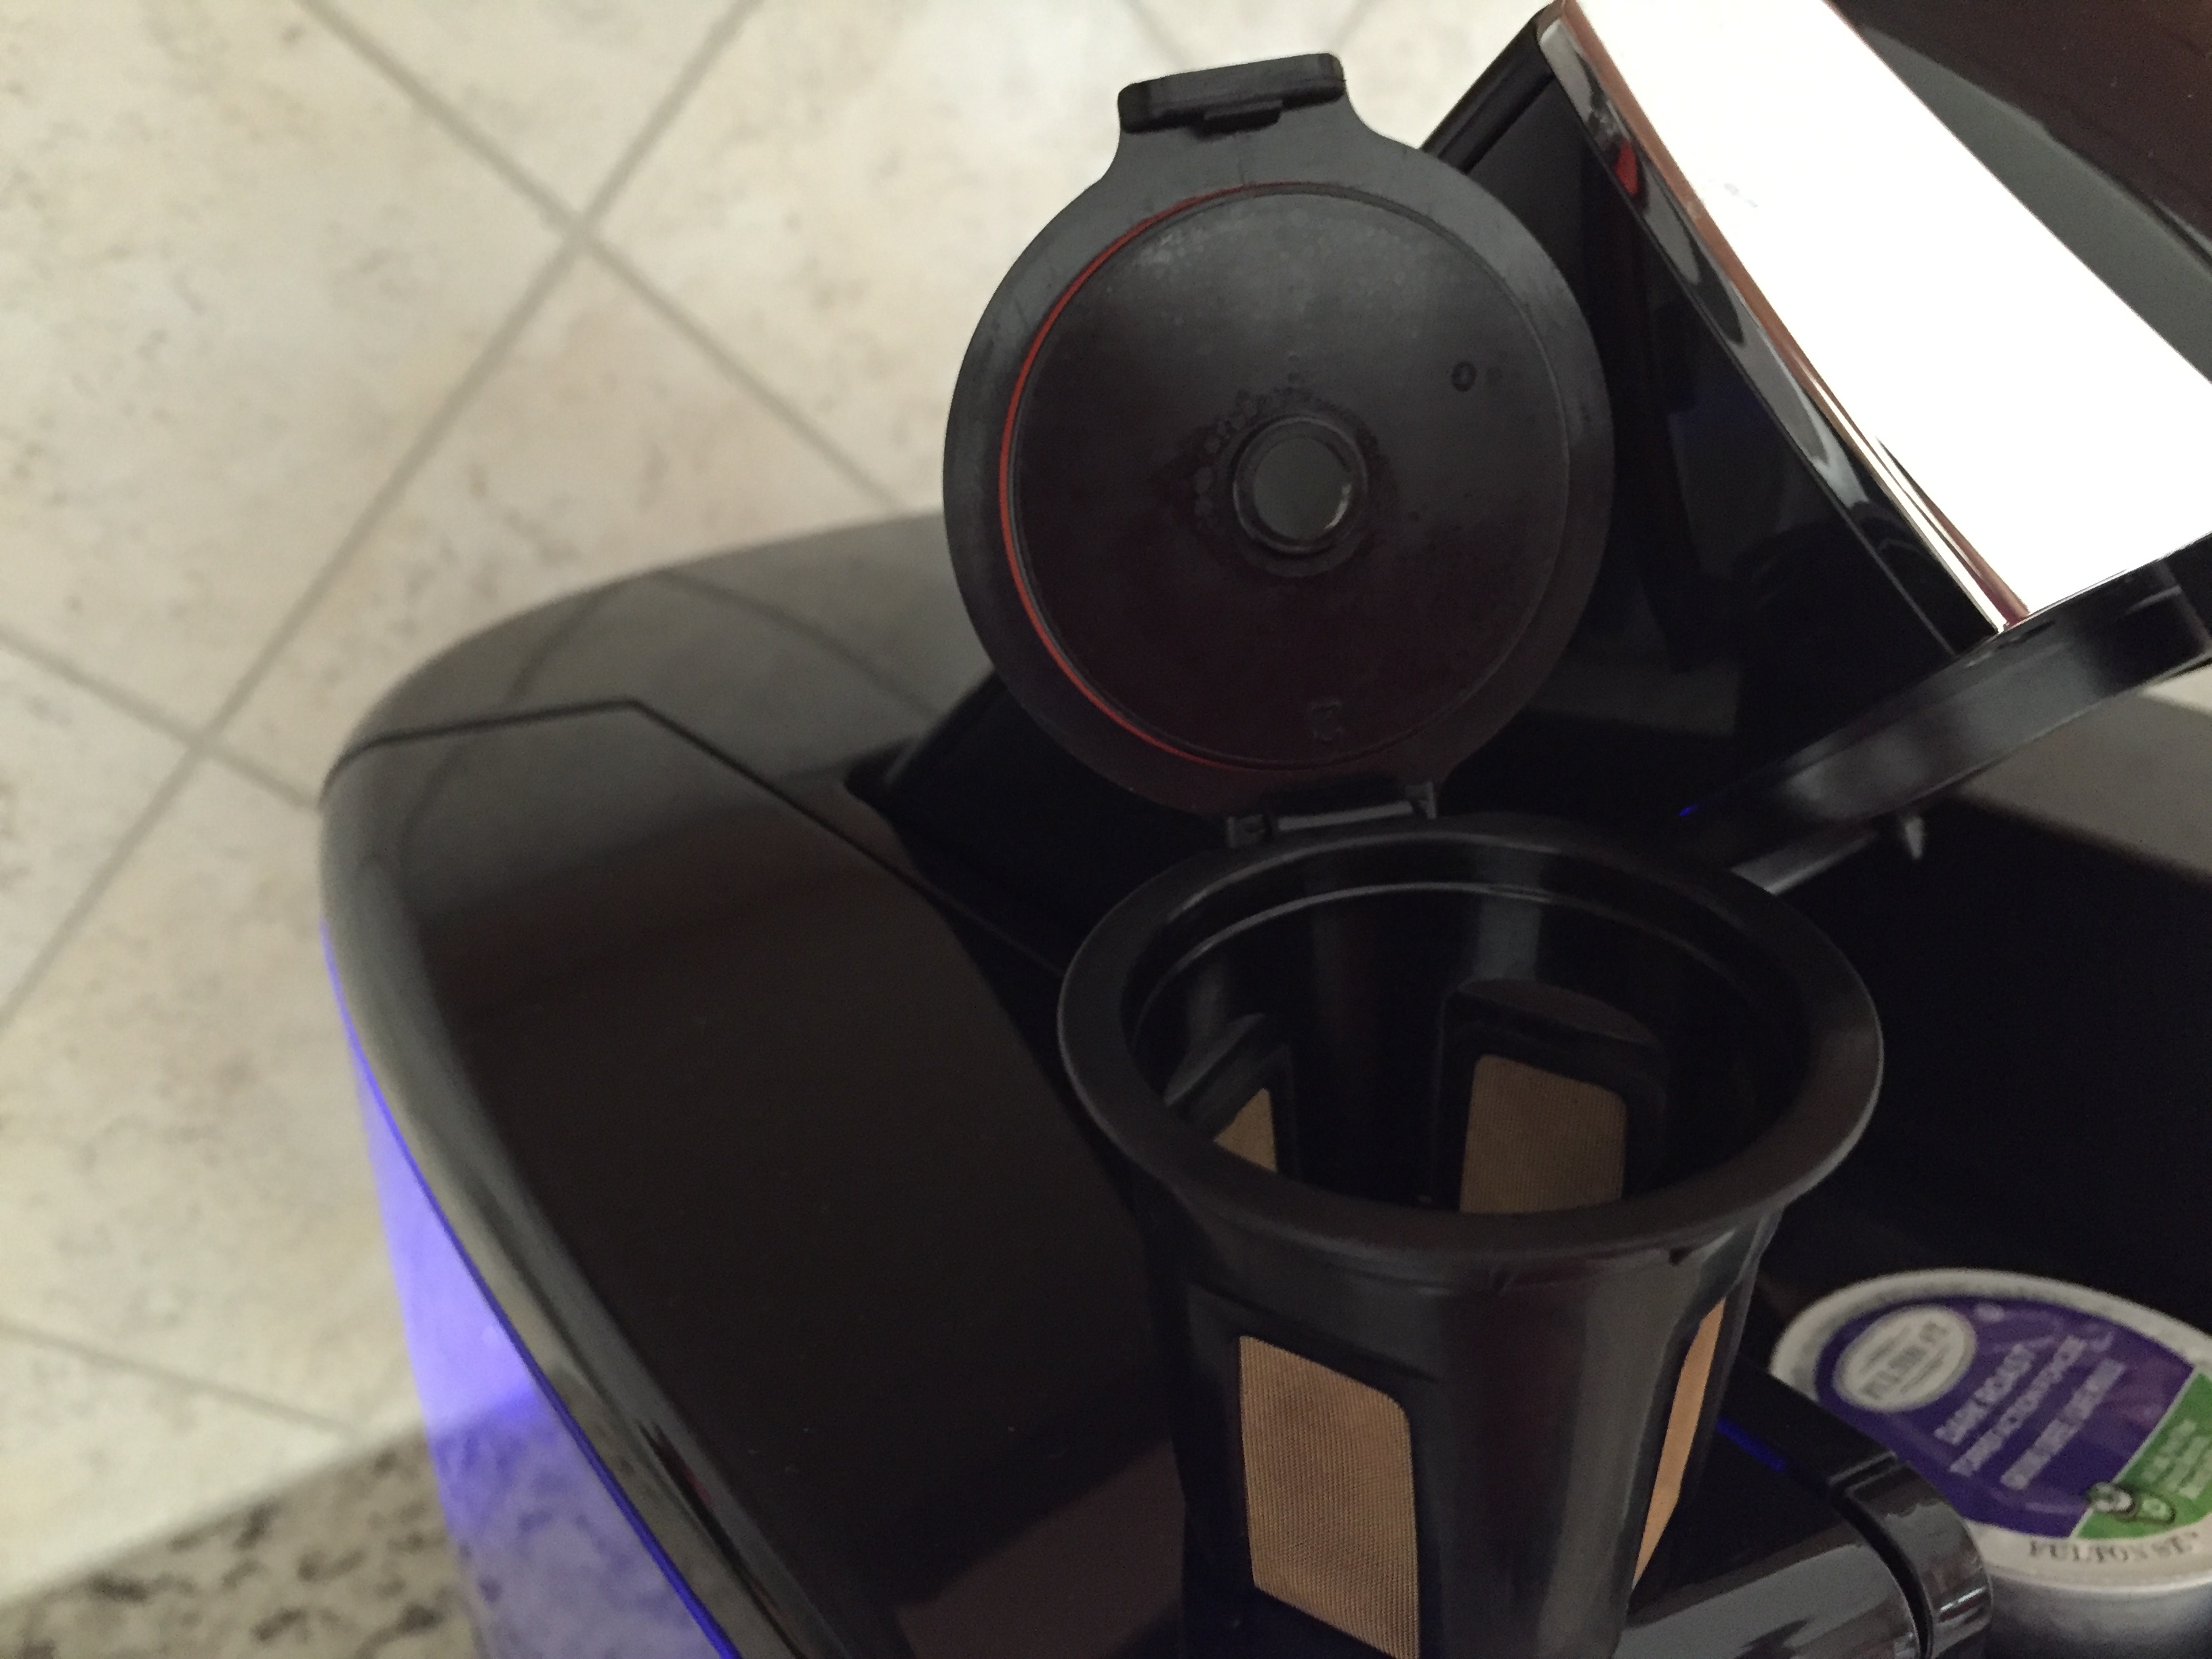 How To Use The iCoffee Opus Review & Giveaway